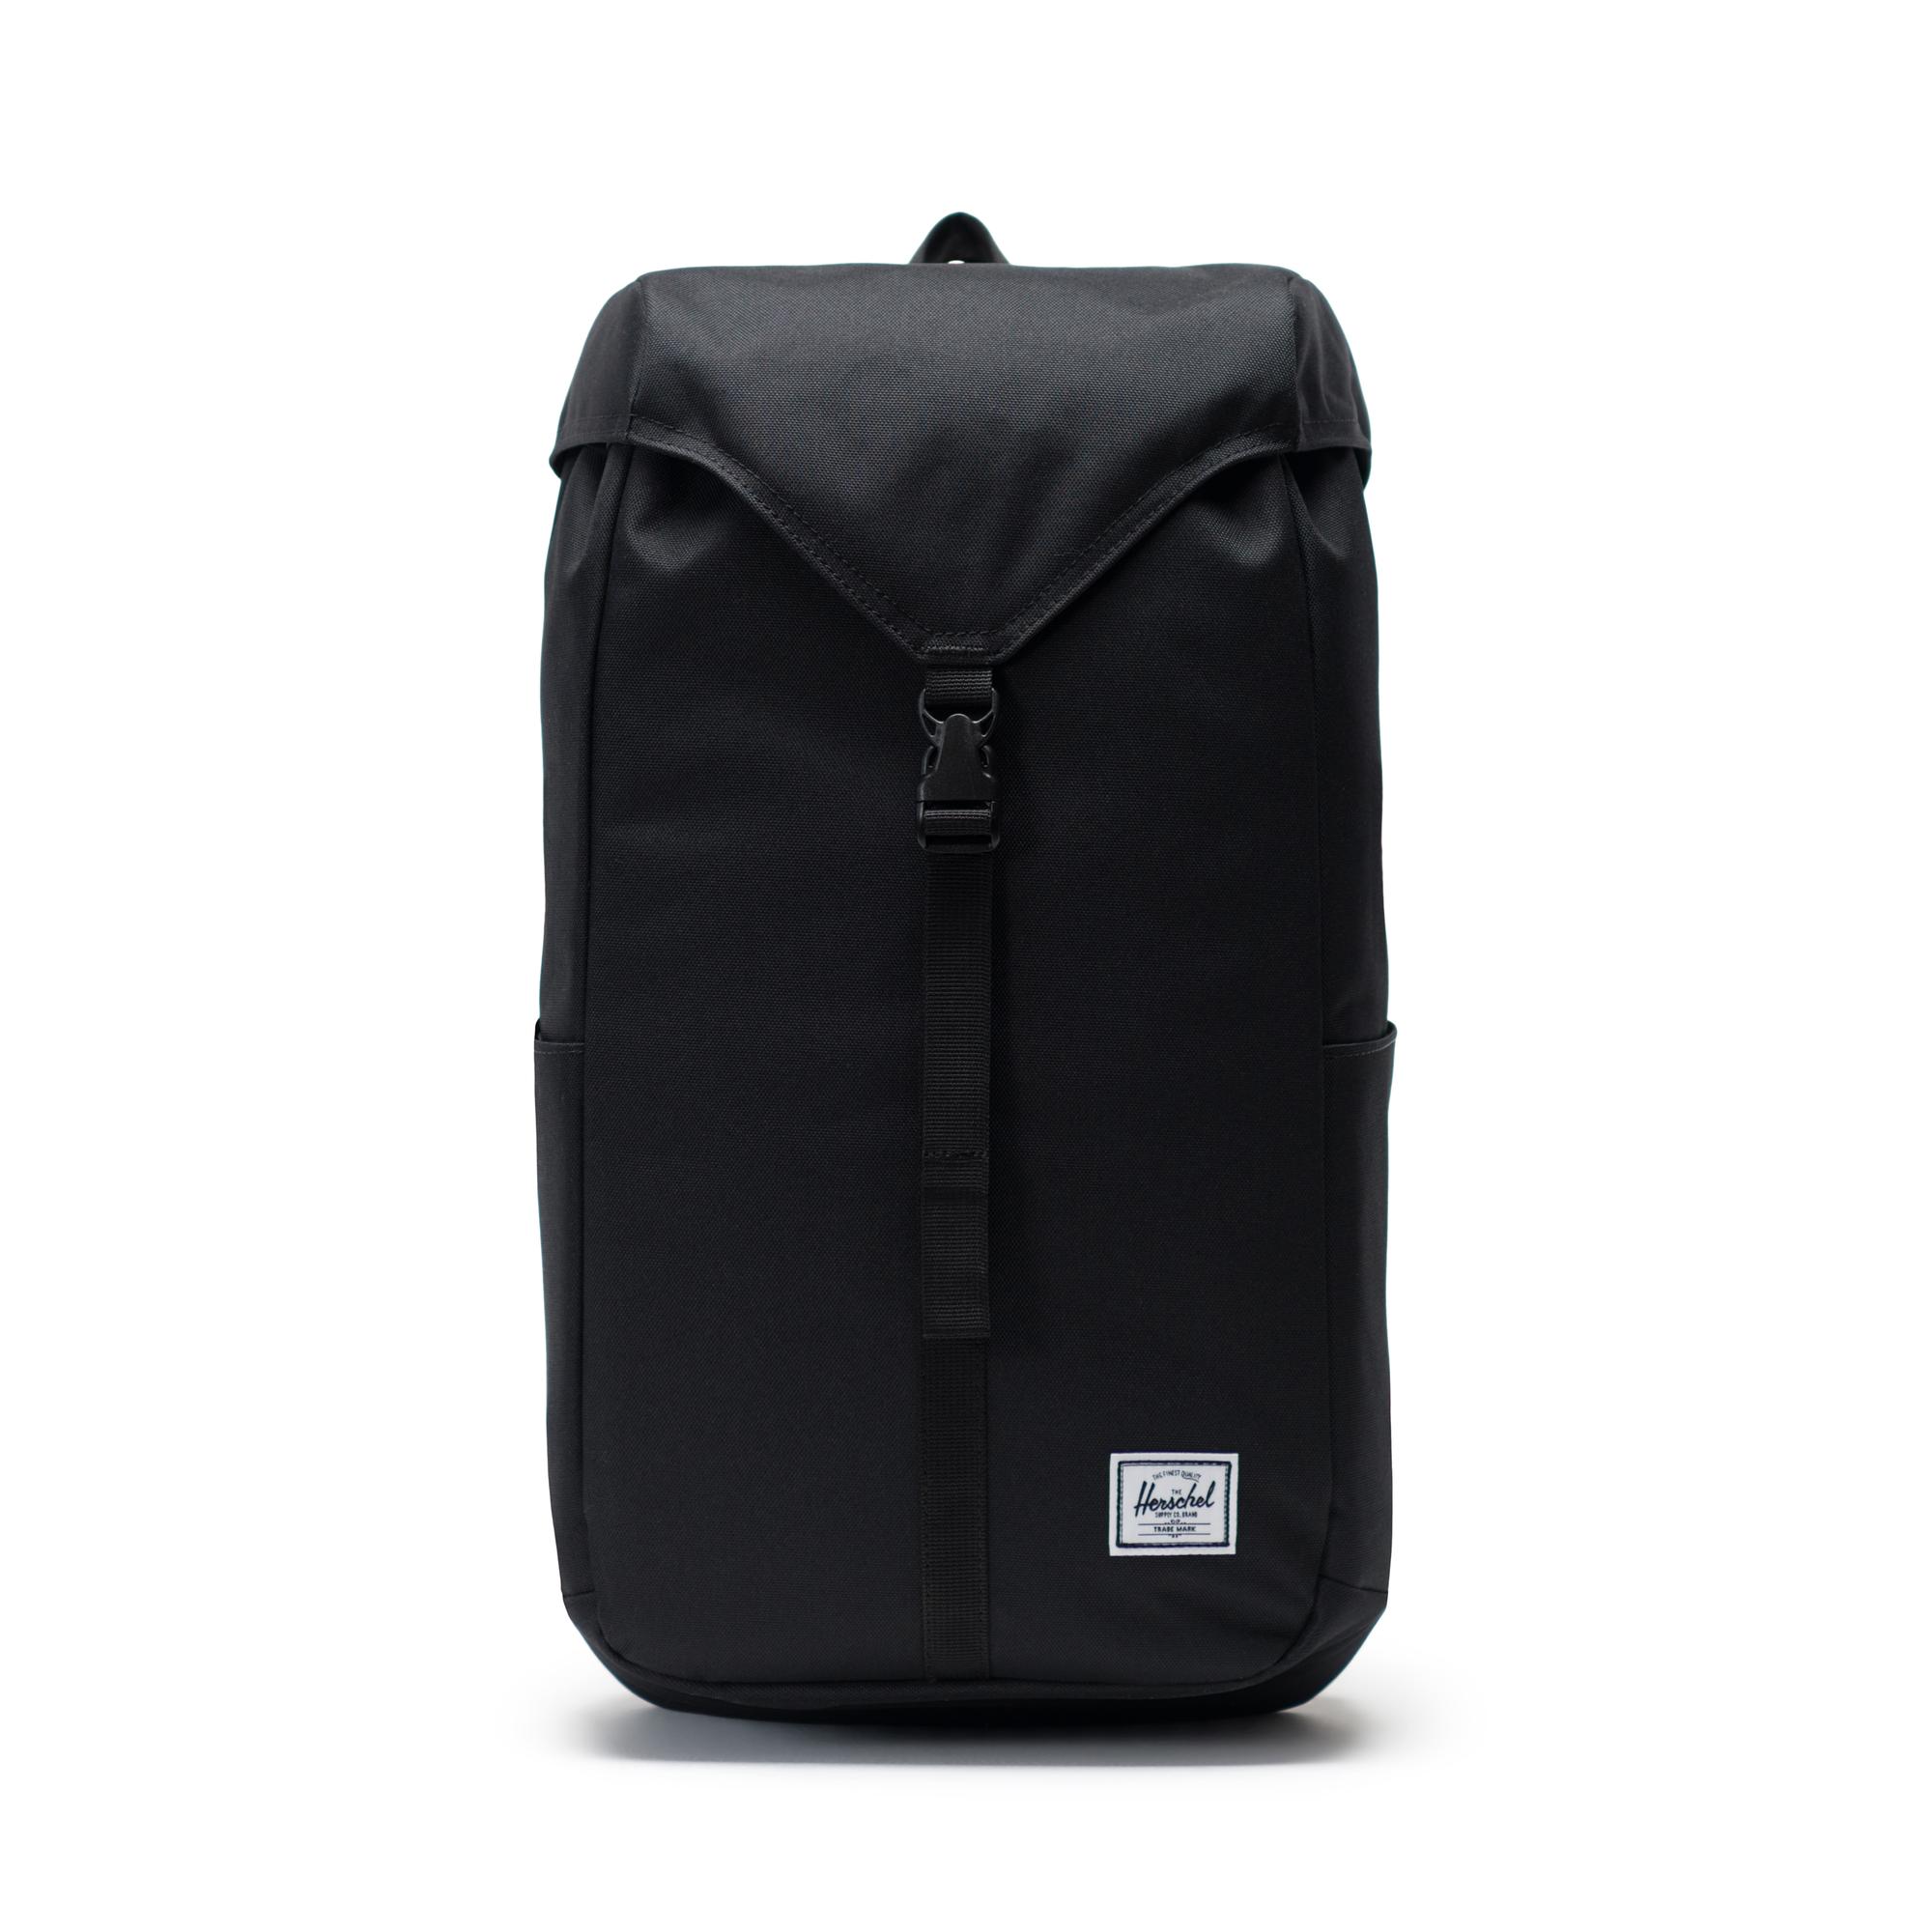 Thompson Backpack | Herschel Supply Company